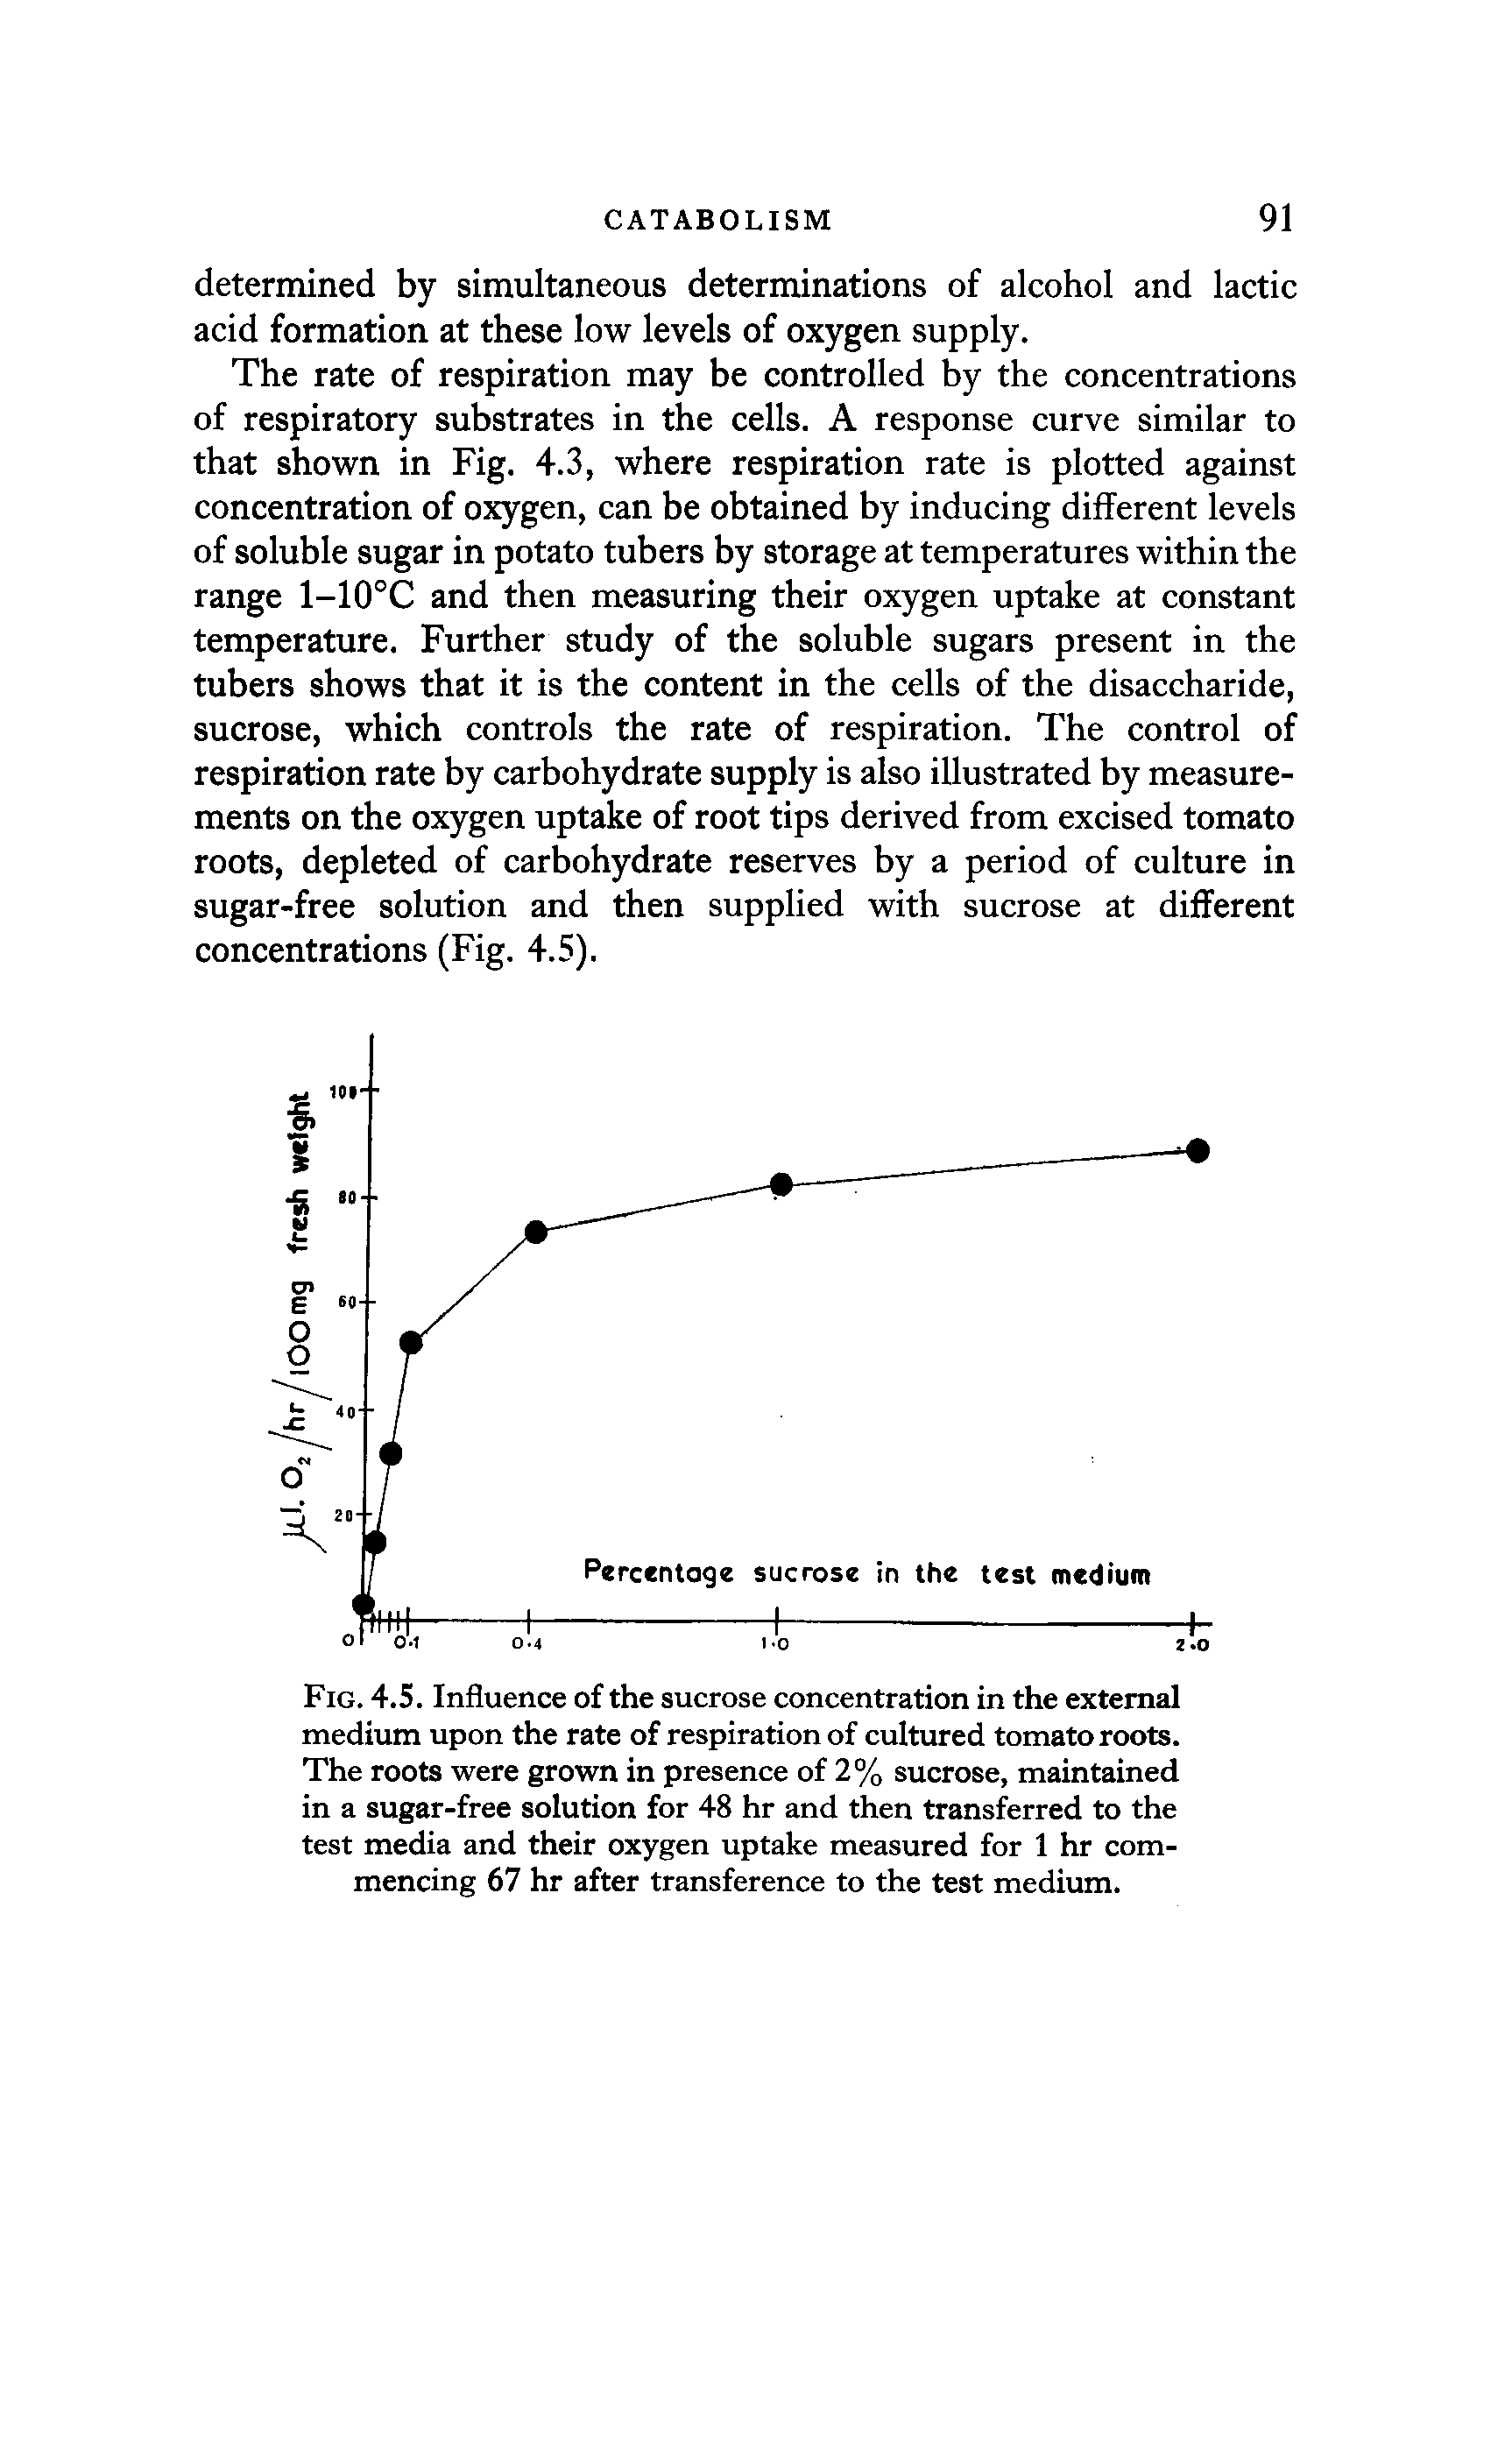 Fig. 4.5. Influence of the sucrose concentration in the external medium upon the rate of respiration of cultured tomato roots. The roots were grown in presence of 2% sucrose, maintained in a sugar-free solution for 48 hr and then transferred to the test media and their oxygen uptake measured for 1 hr commencing 67 hr after transference to the test medium.